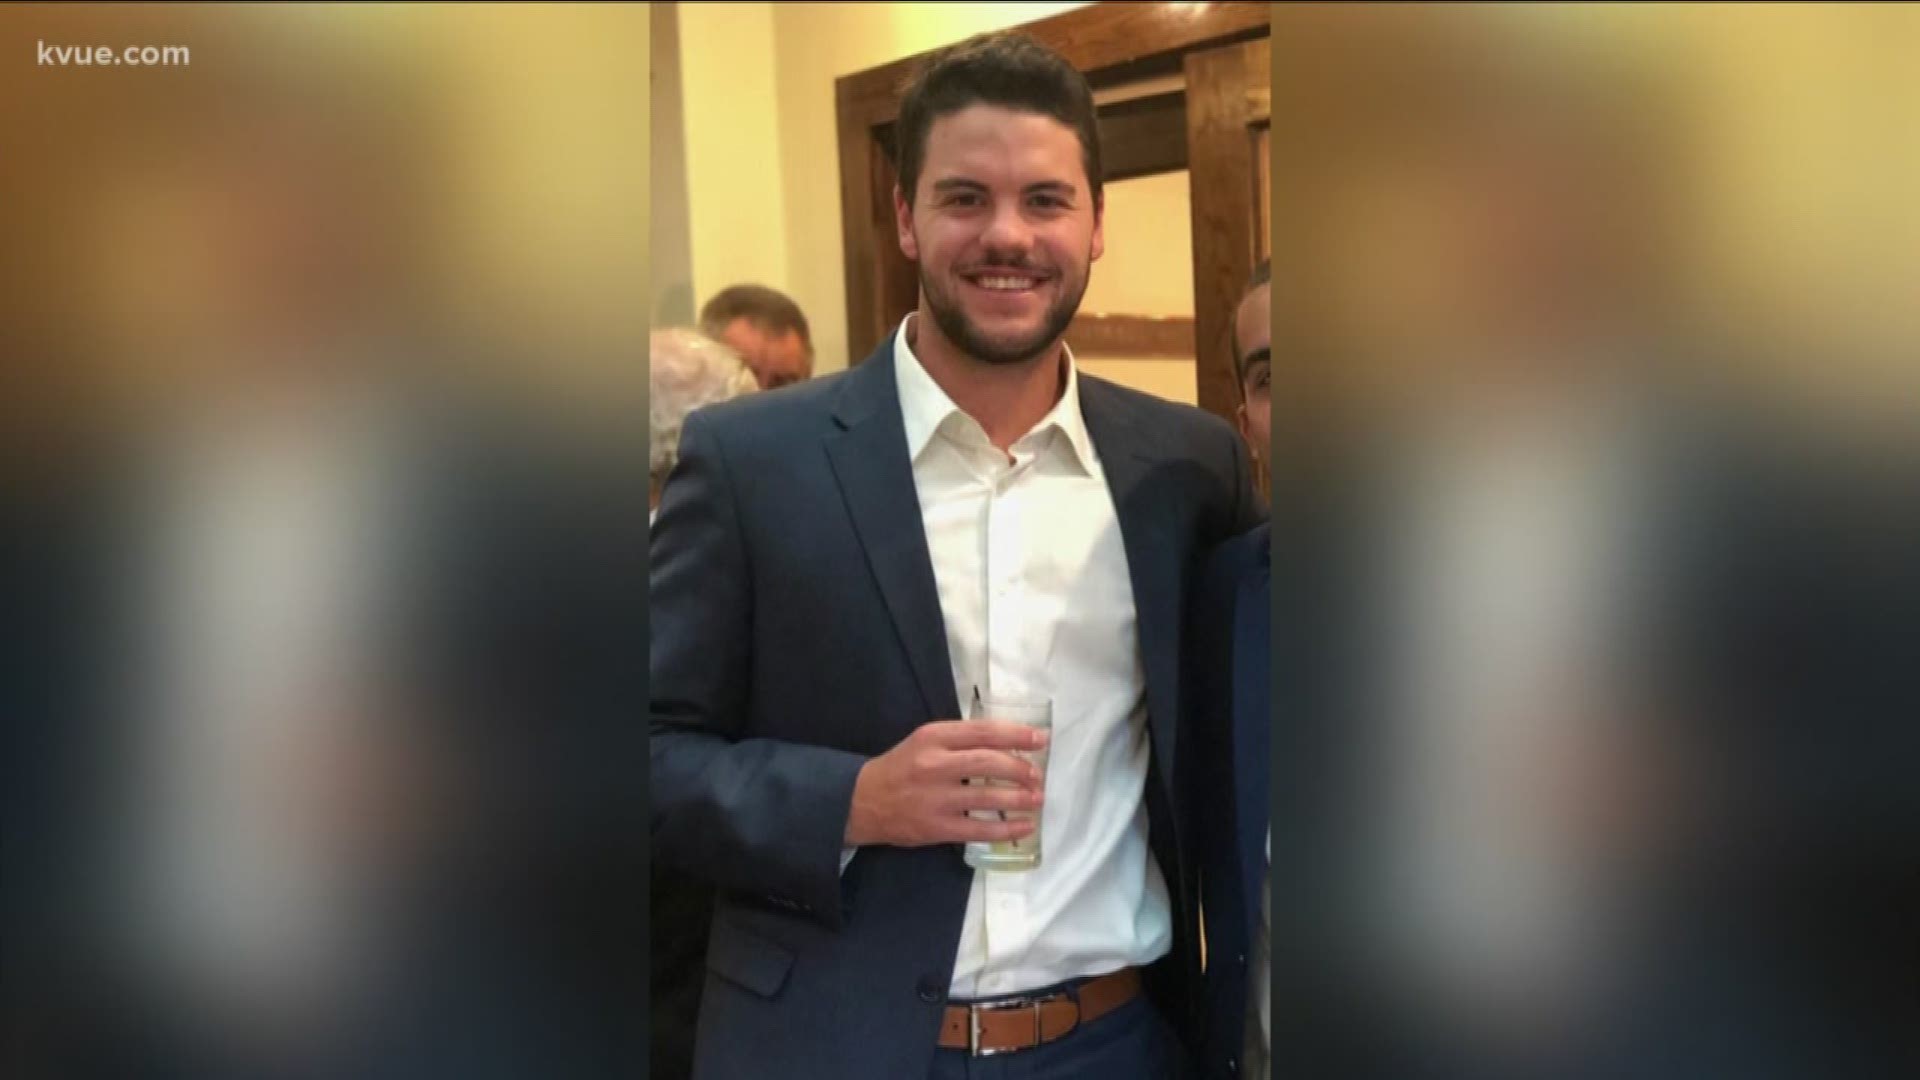 On Sunday, the search continued for a man whose friends say he went missing Saturday morning as they were in town for ACL.